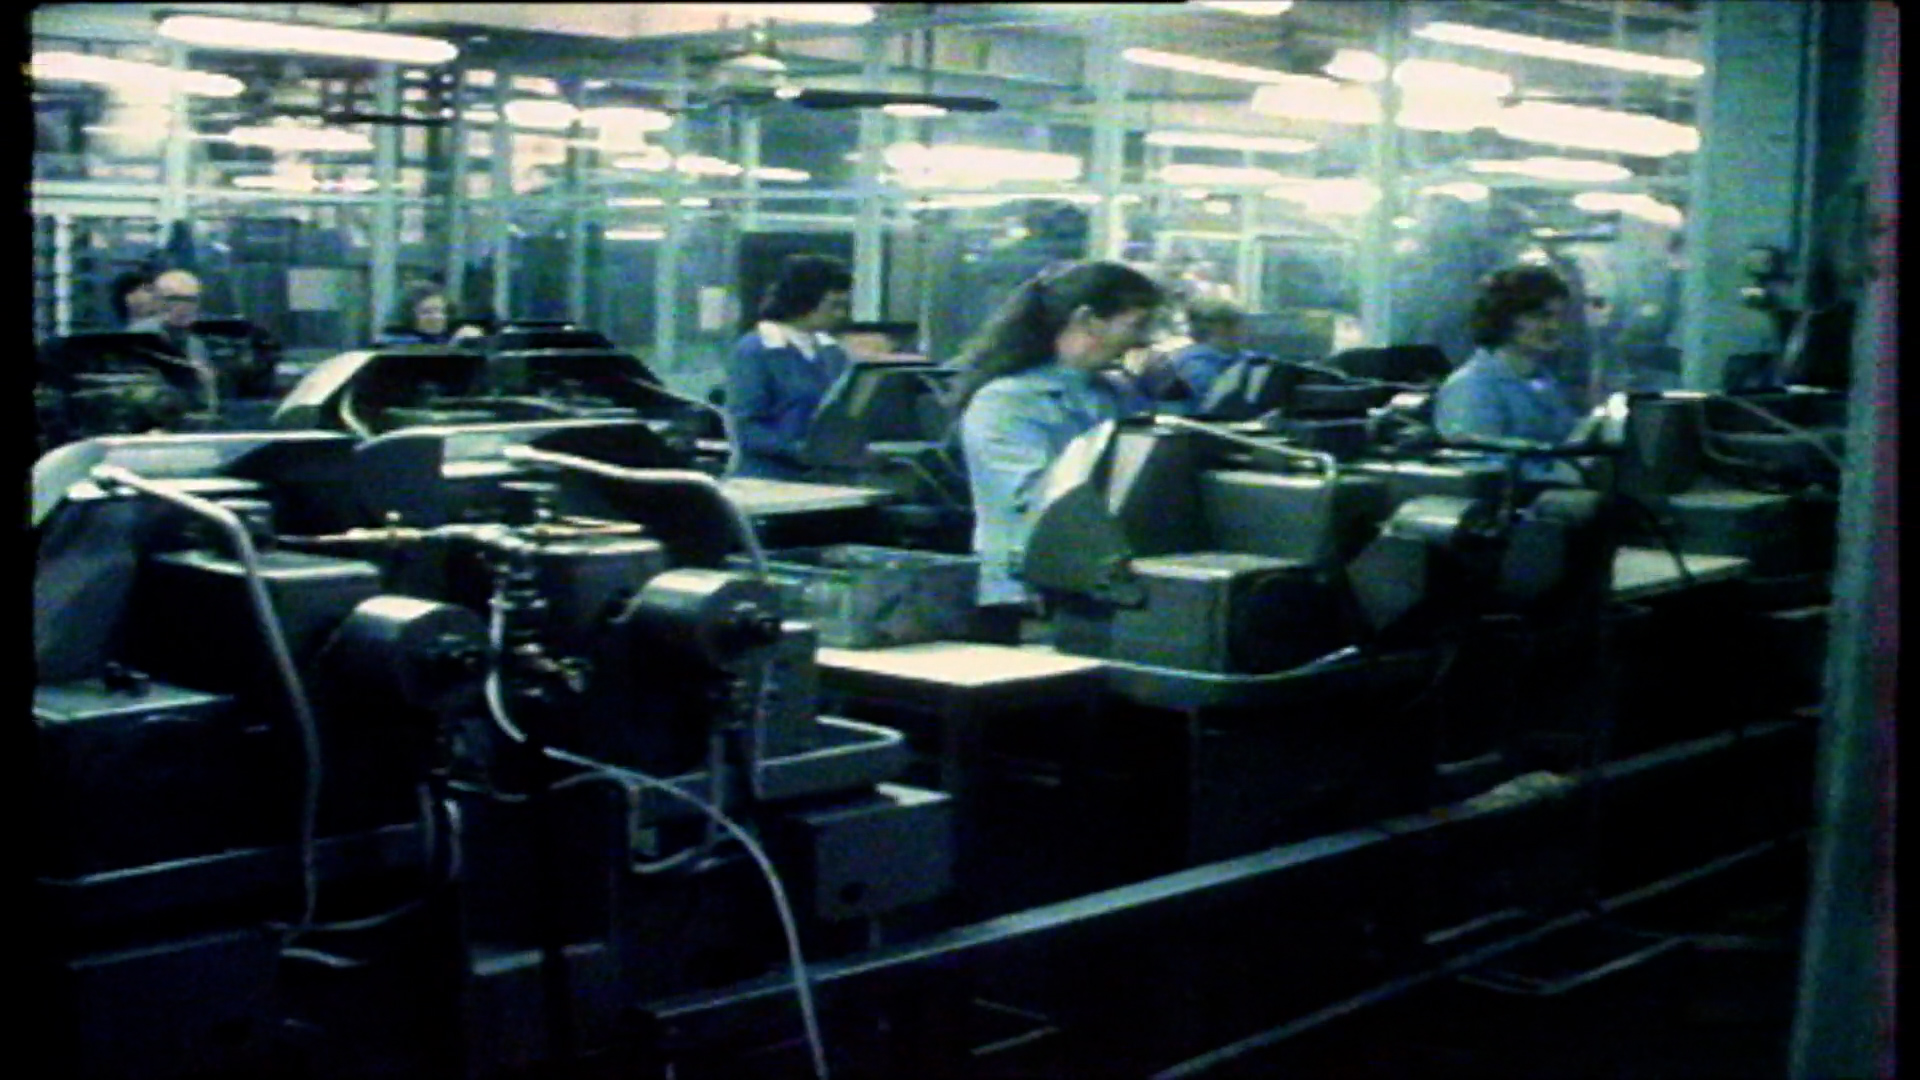 Factory workers have moved from making watches to electronics.